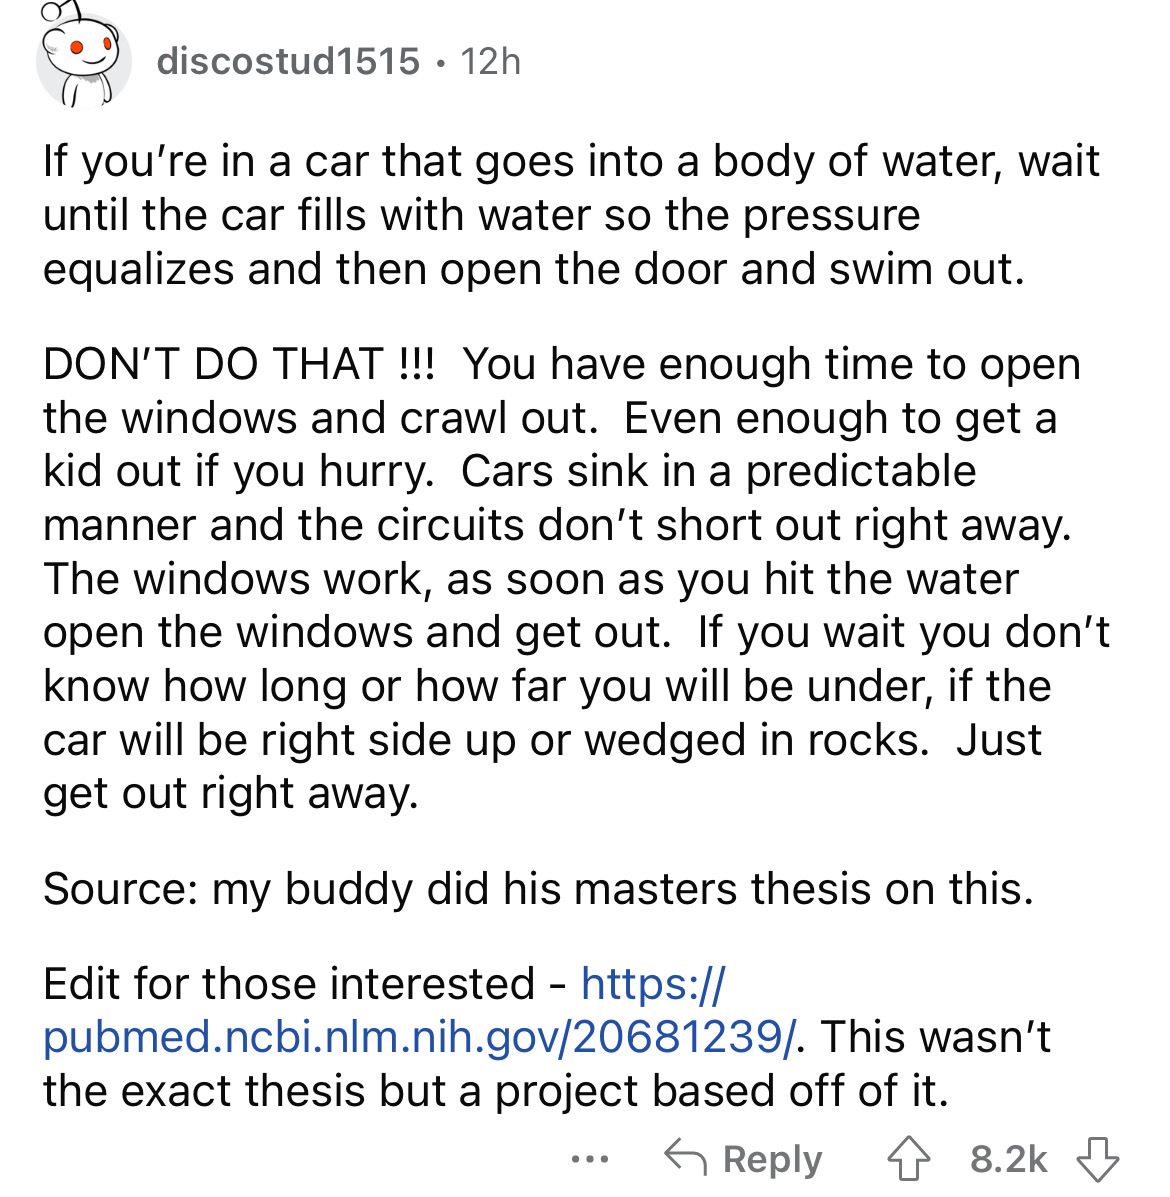 angle - discostud1515. 12h If you're in a car that goes into a body of water, wait until the car fills with water so the pressure equalizes and then open the door and swim out. Don'T Do That!!! You have enough time to open the windows and crawl out. Even 